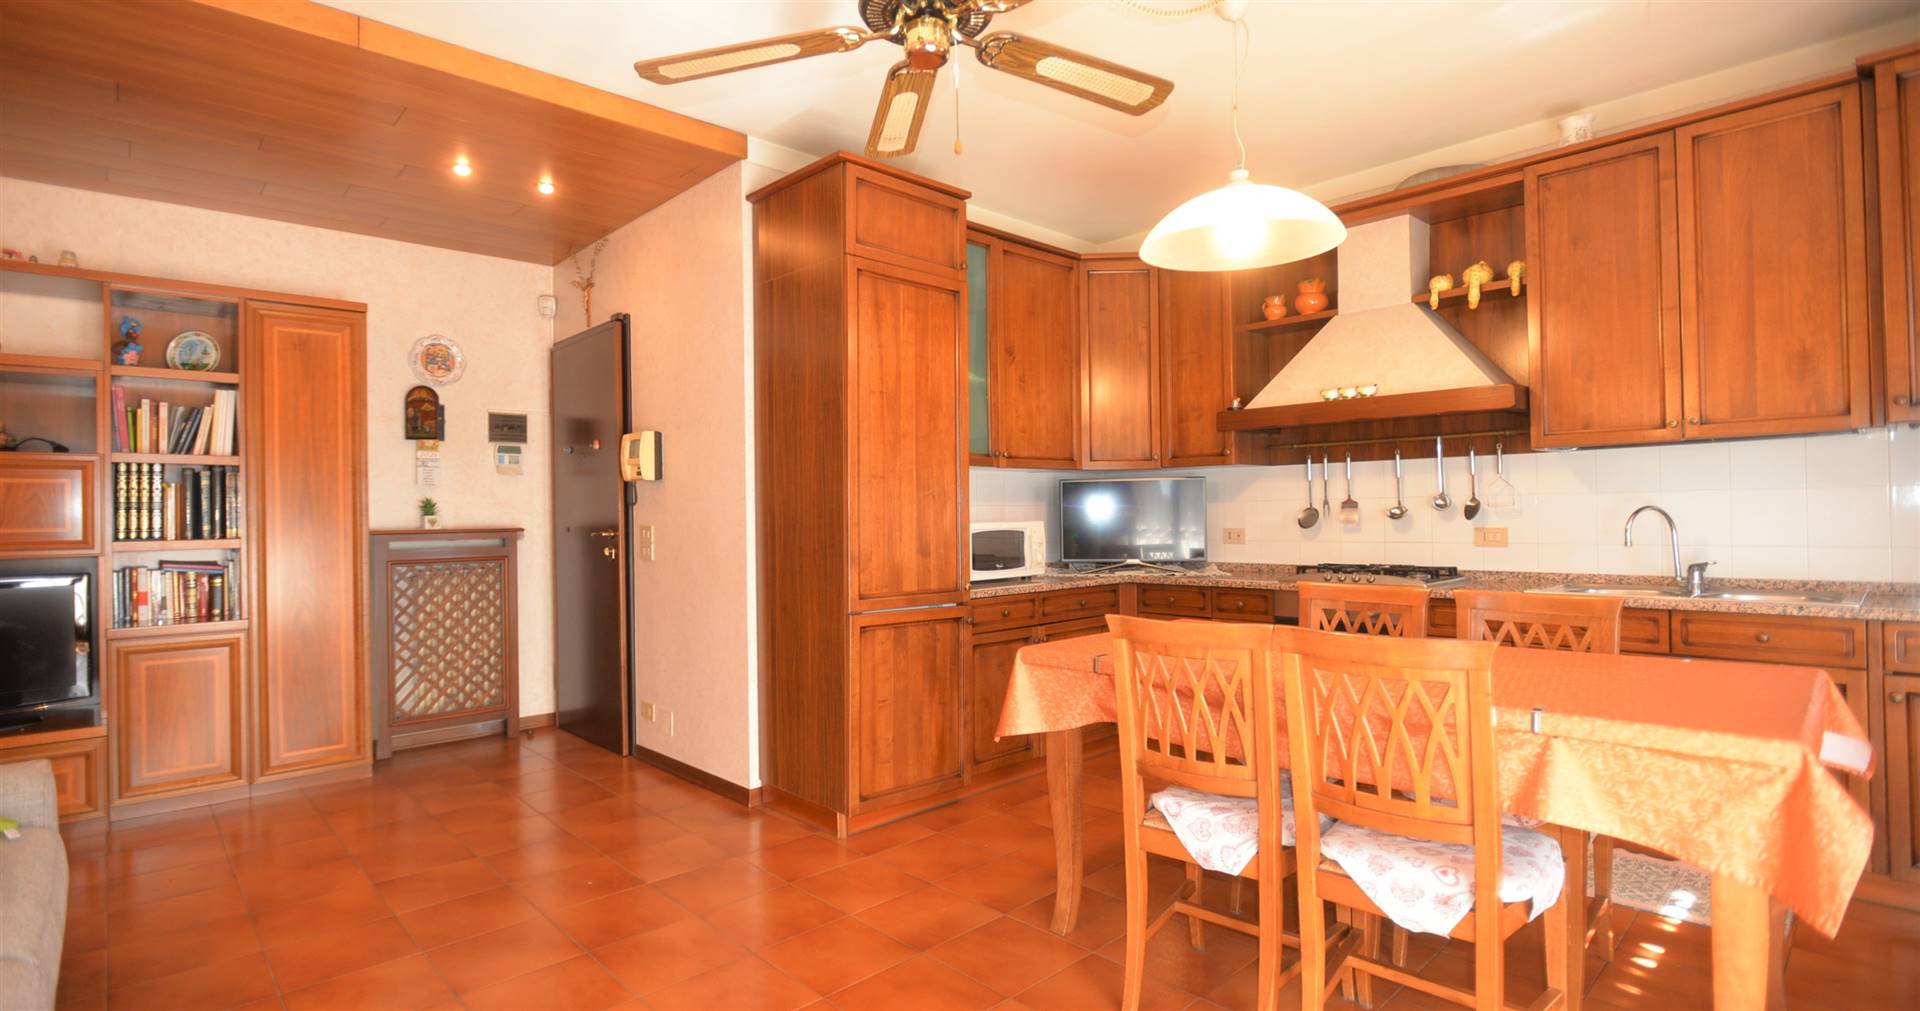 ROBEGANO, SALZANO, Apartment for sale of 70 Sq. mt., Excellent Condition, Heating Individual heating system, placed at 1° on 3, composed by: 3 Rooms, 